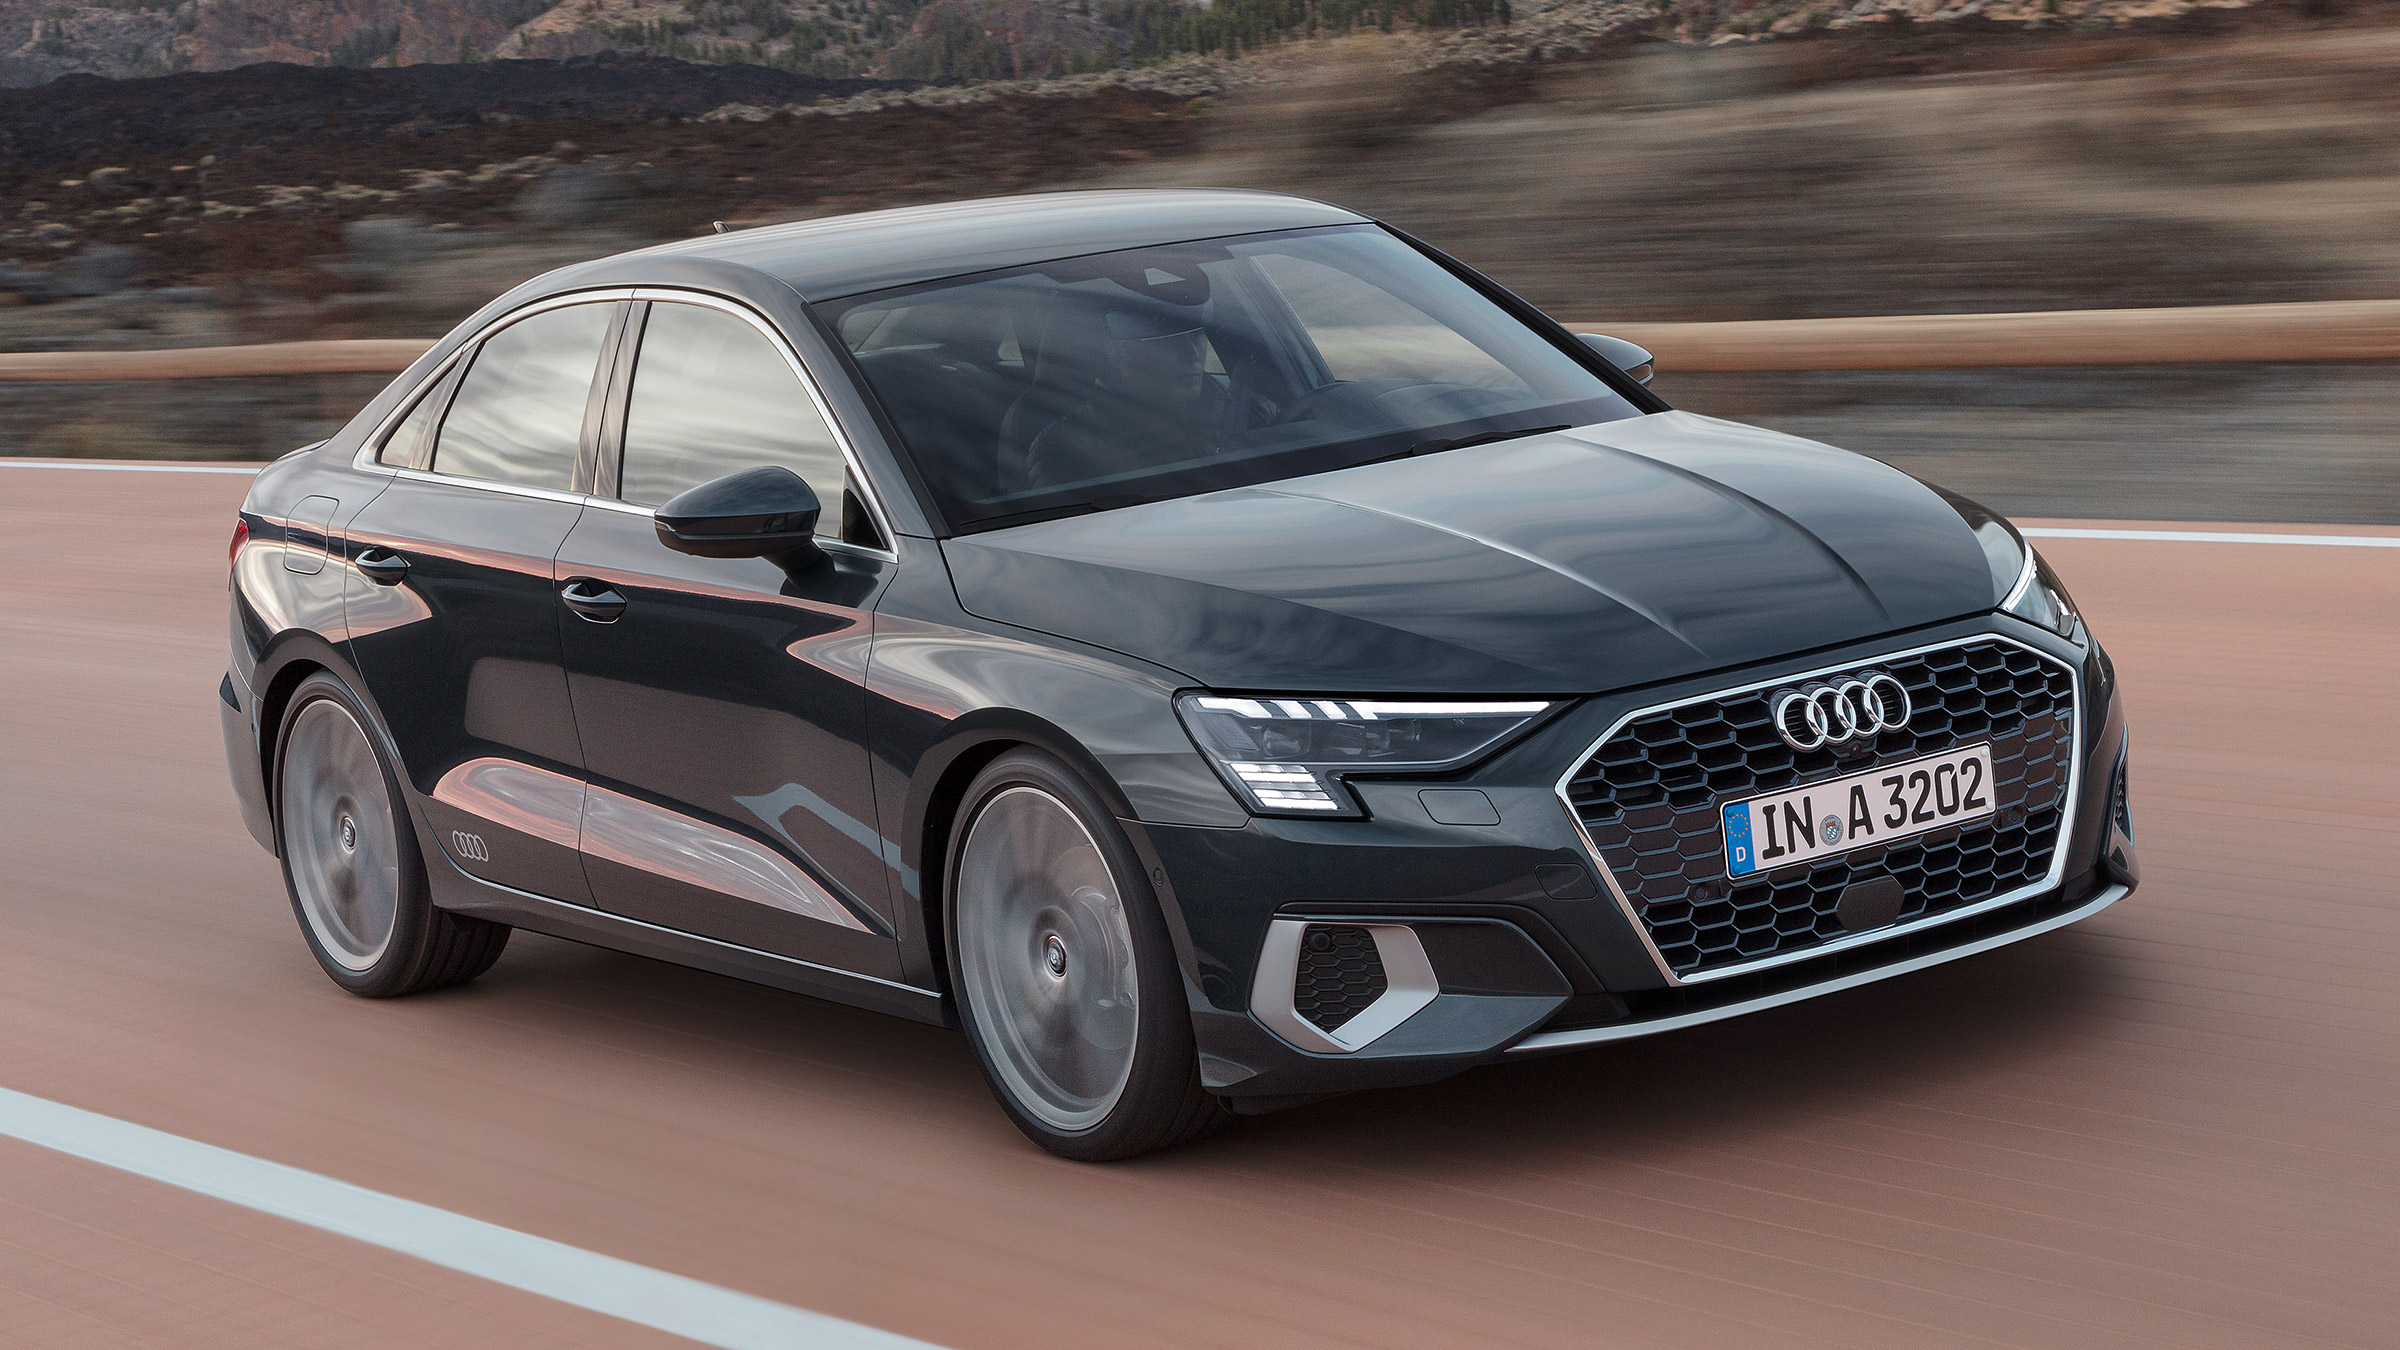 New 2020 Audi A3 Saloon arrives to take on BMW 2 Series 